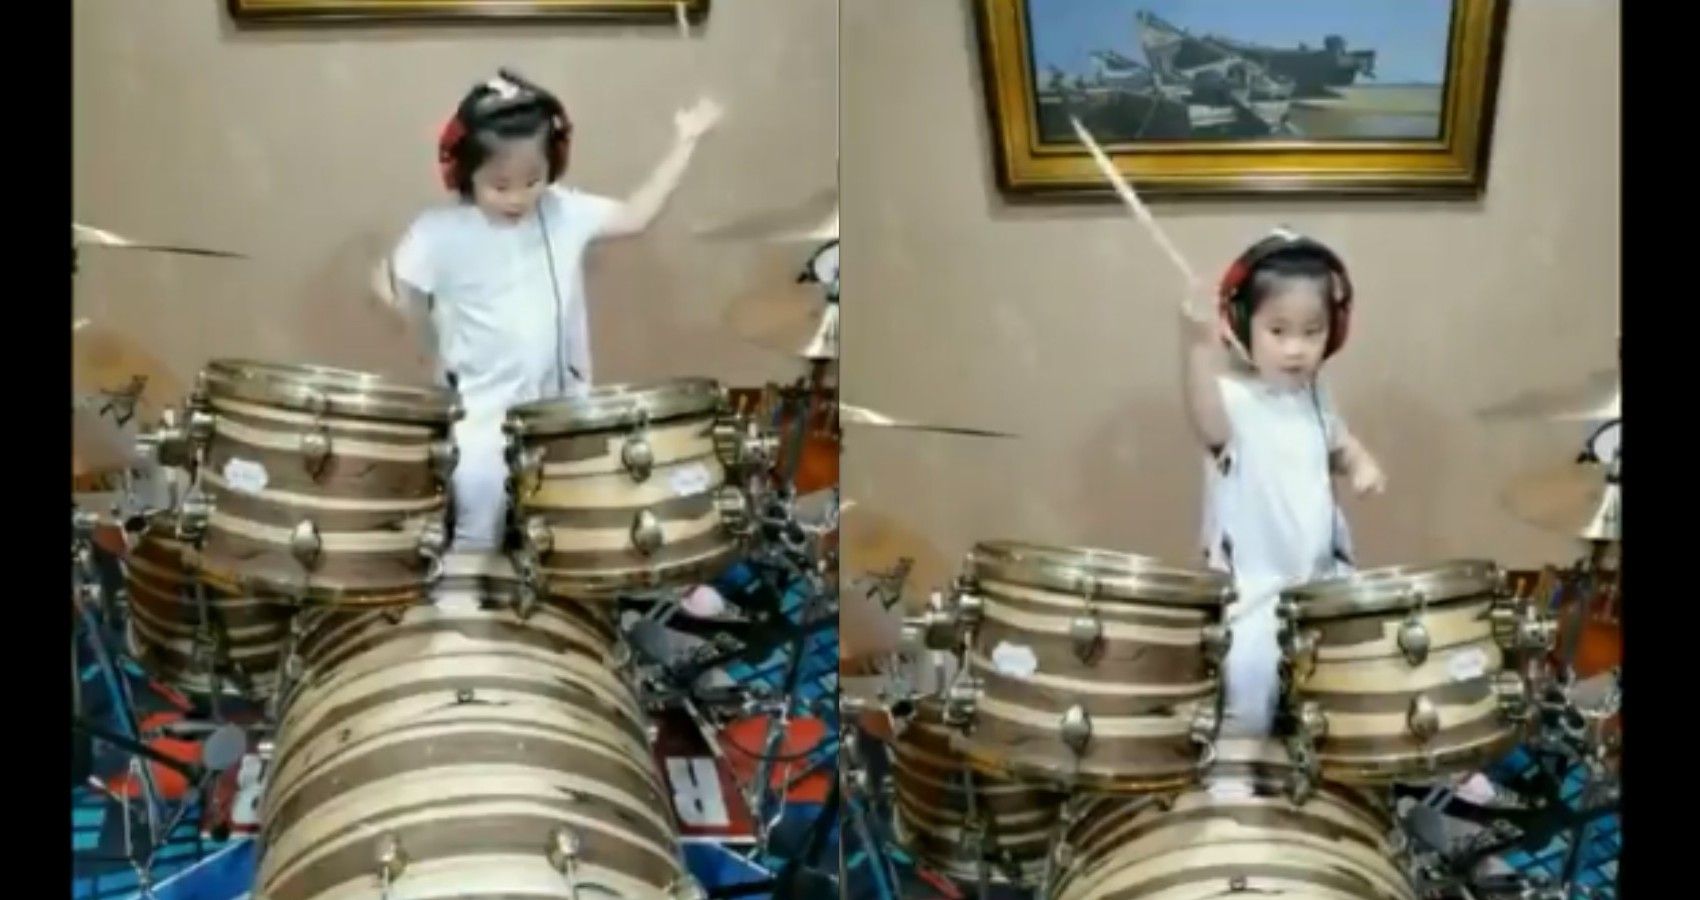 A young girl playing the drums